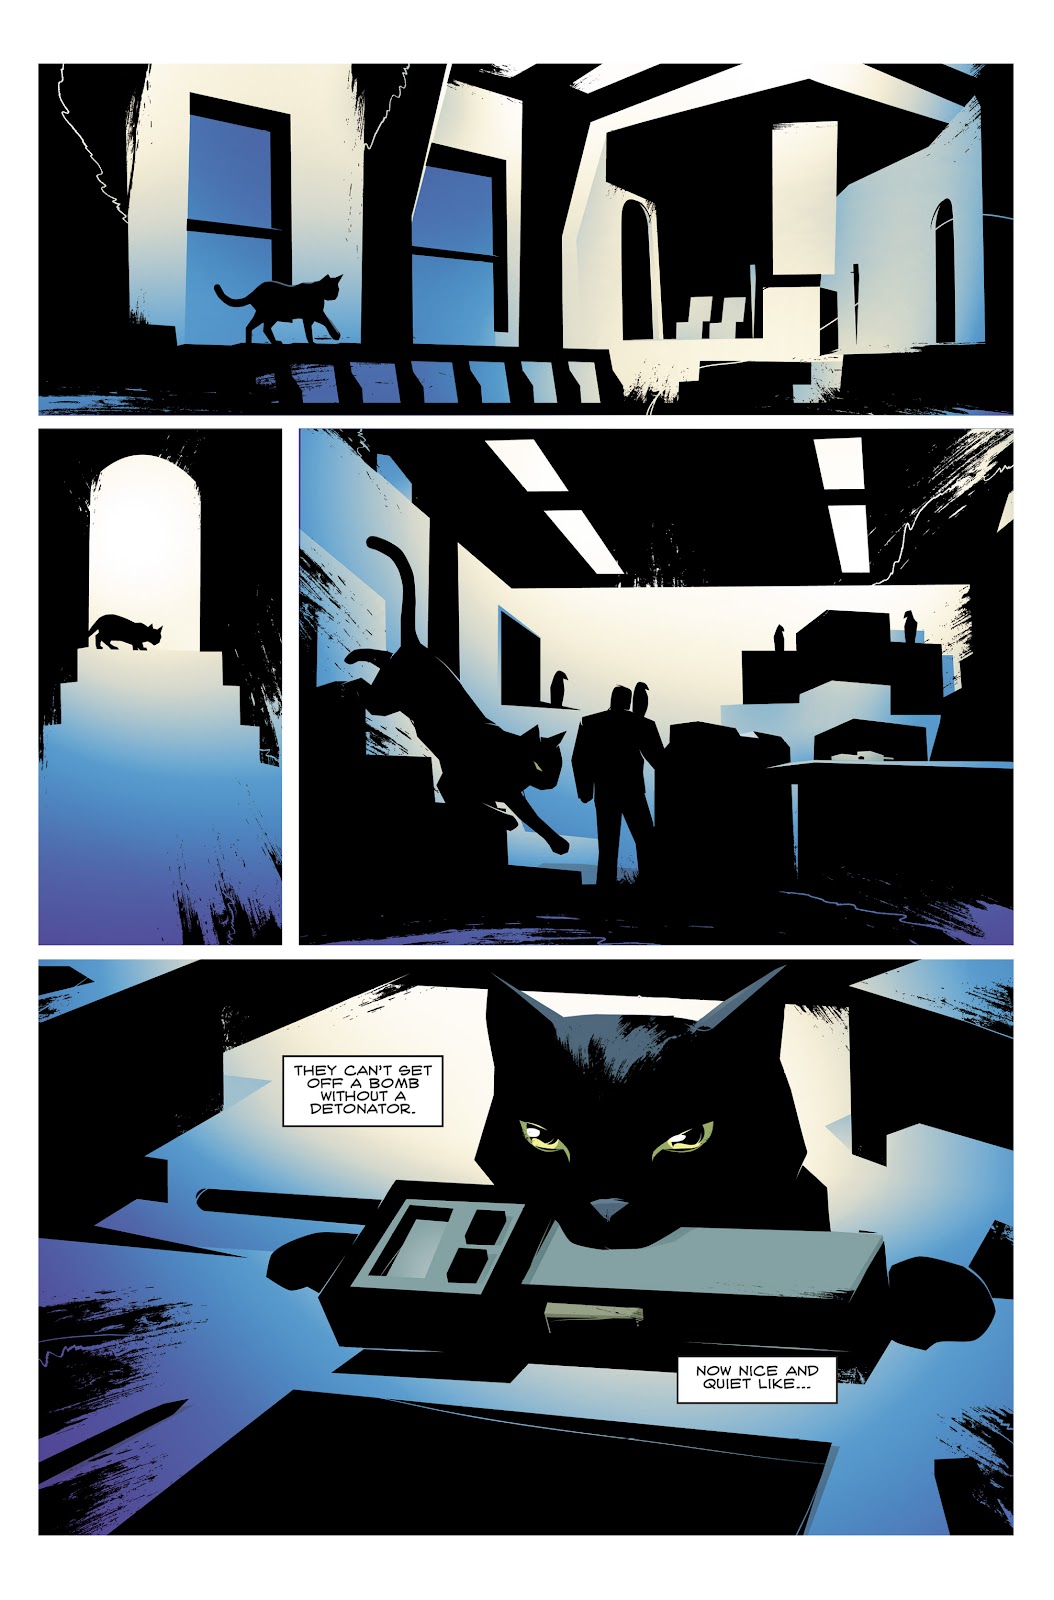 Hero Cats: Midnight Over Stellar City Vol. 2 issue 1 - Page 16